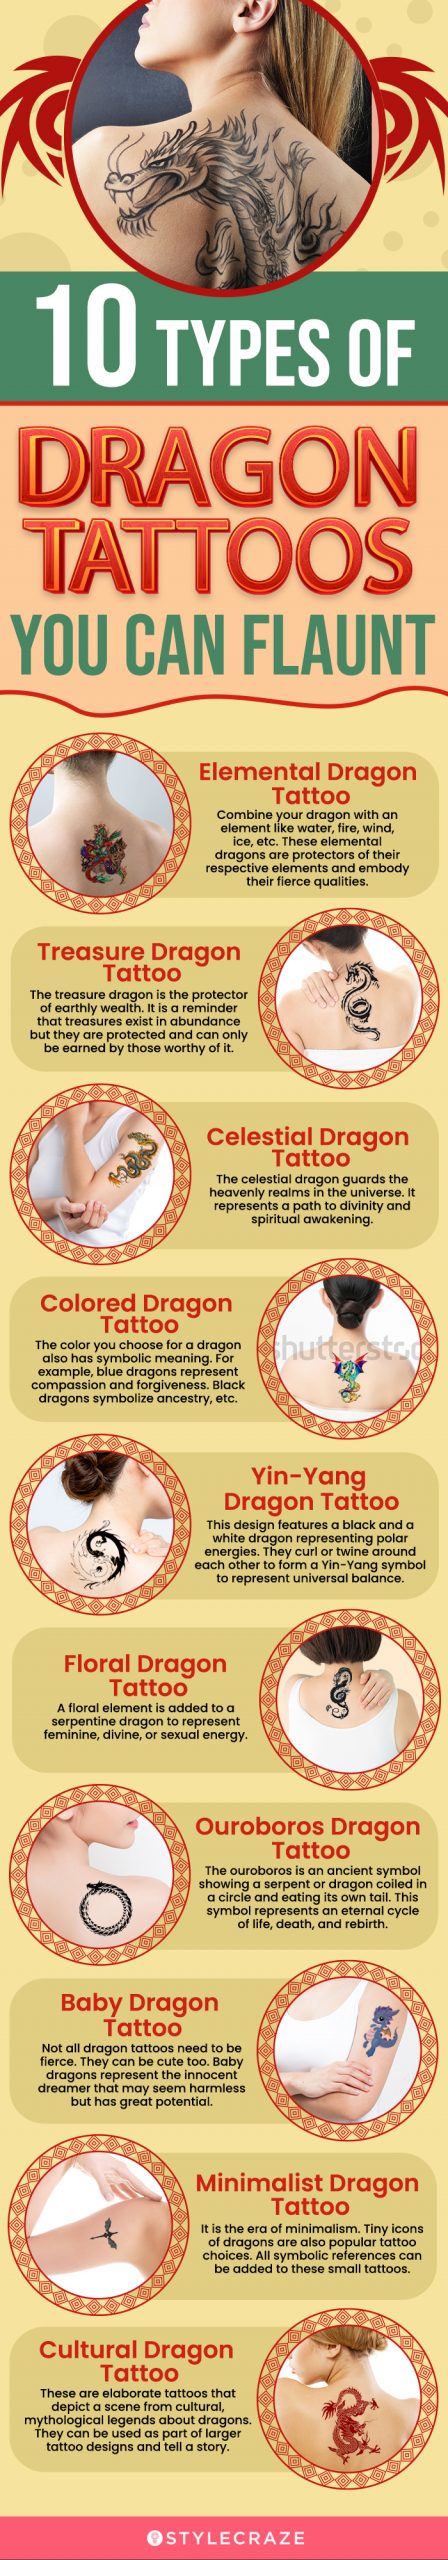 10 types of dragon tattoos you can flaunt (infographic)